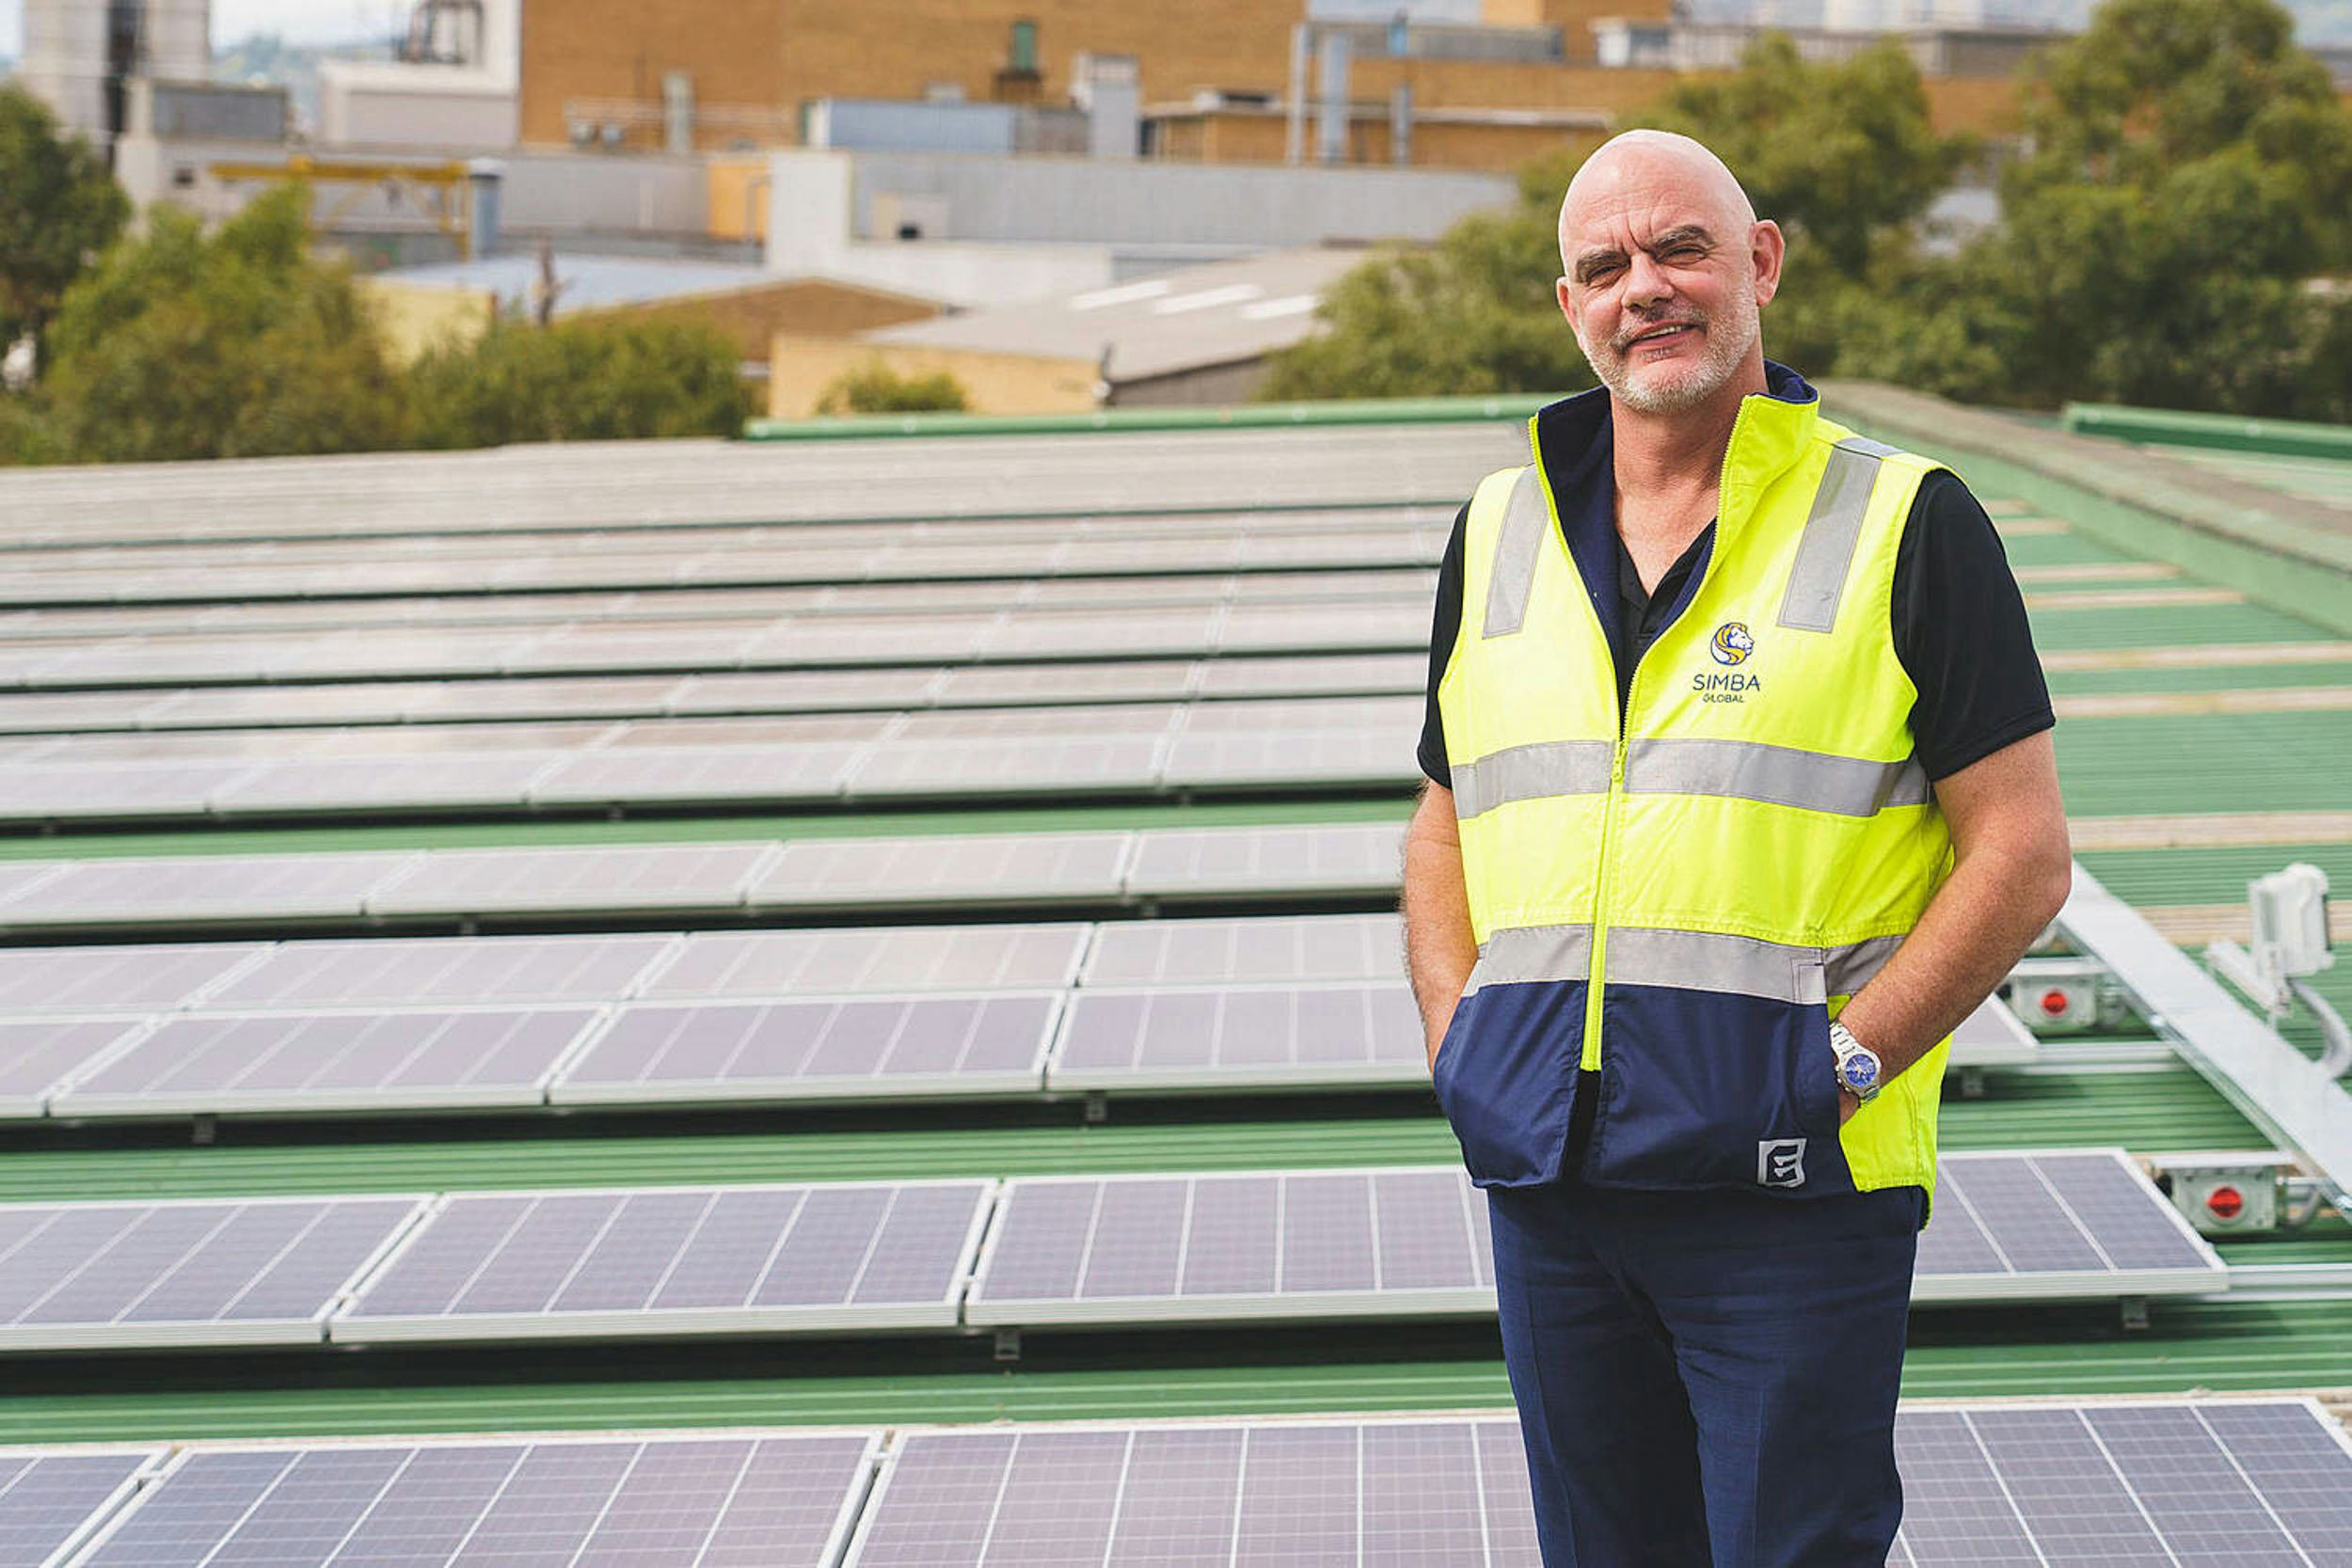 One year of Solar Power at Simba’s Head Office